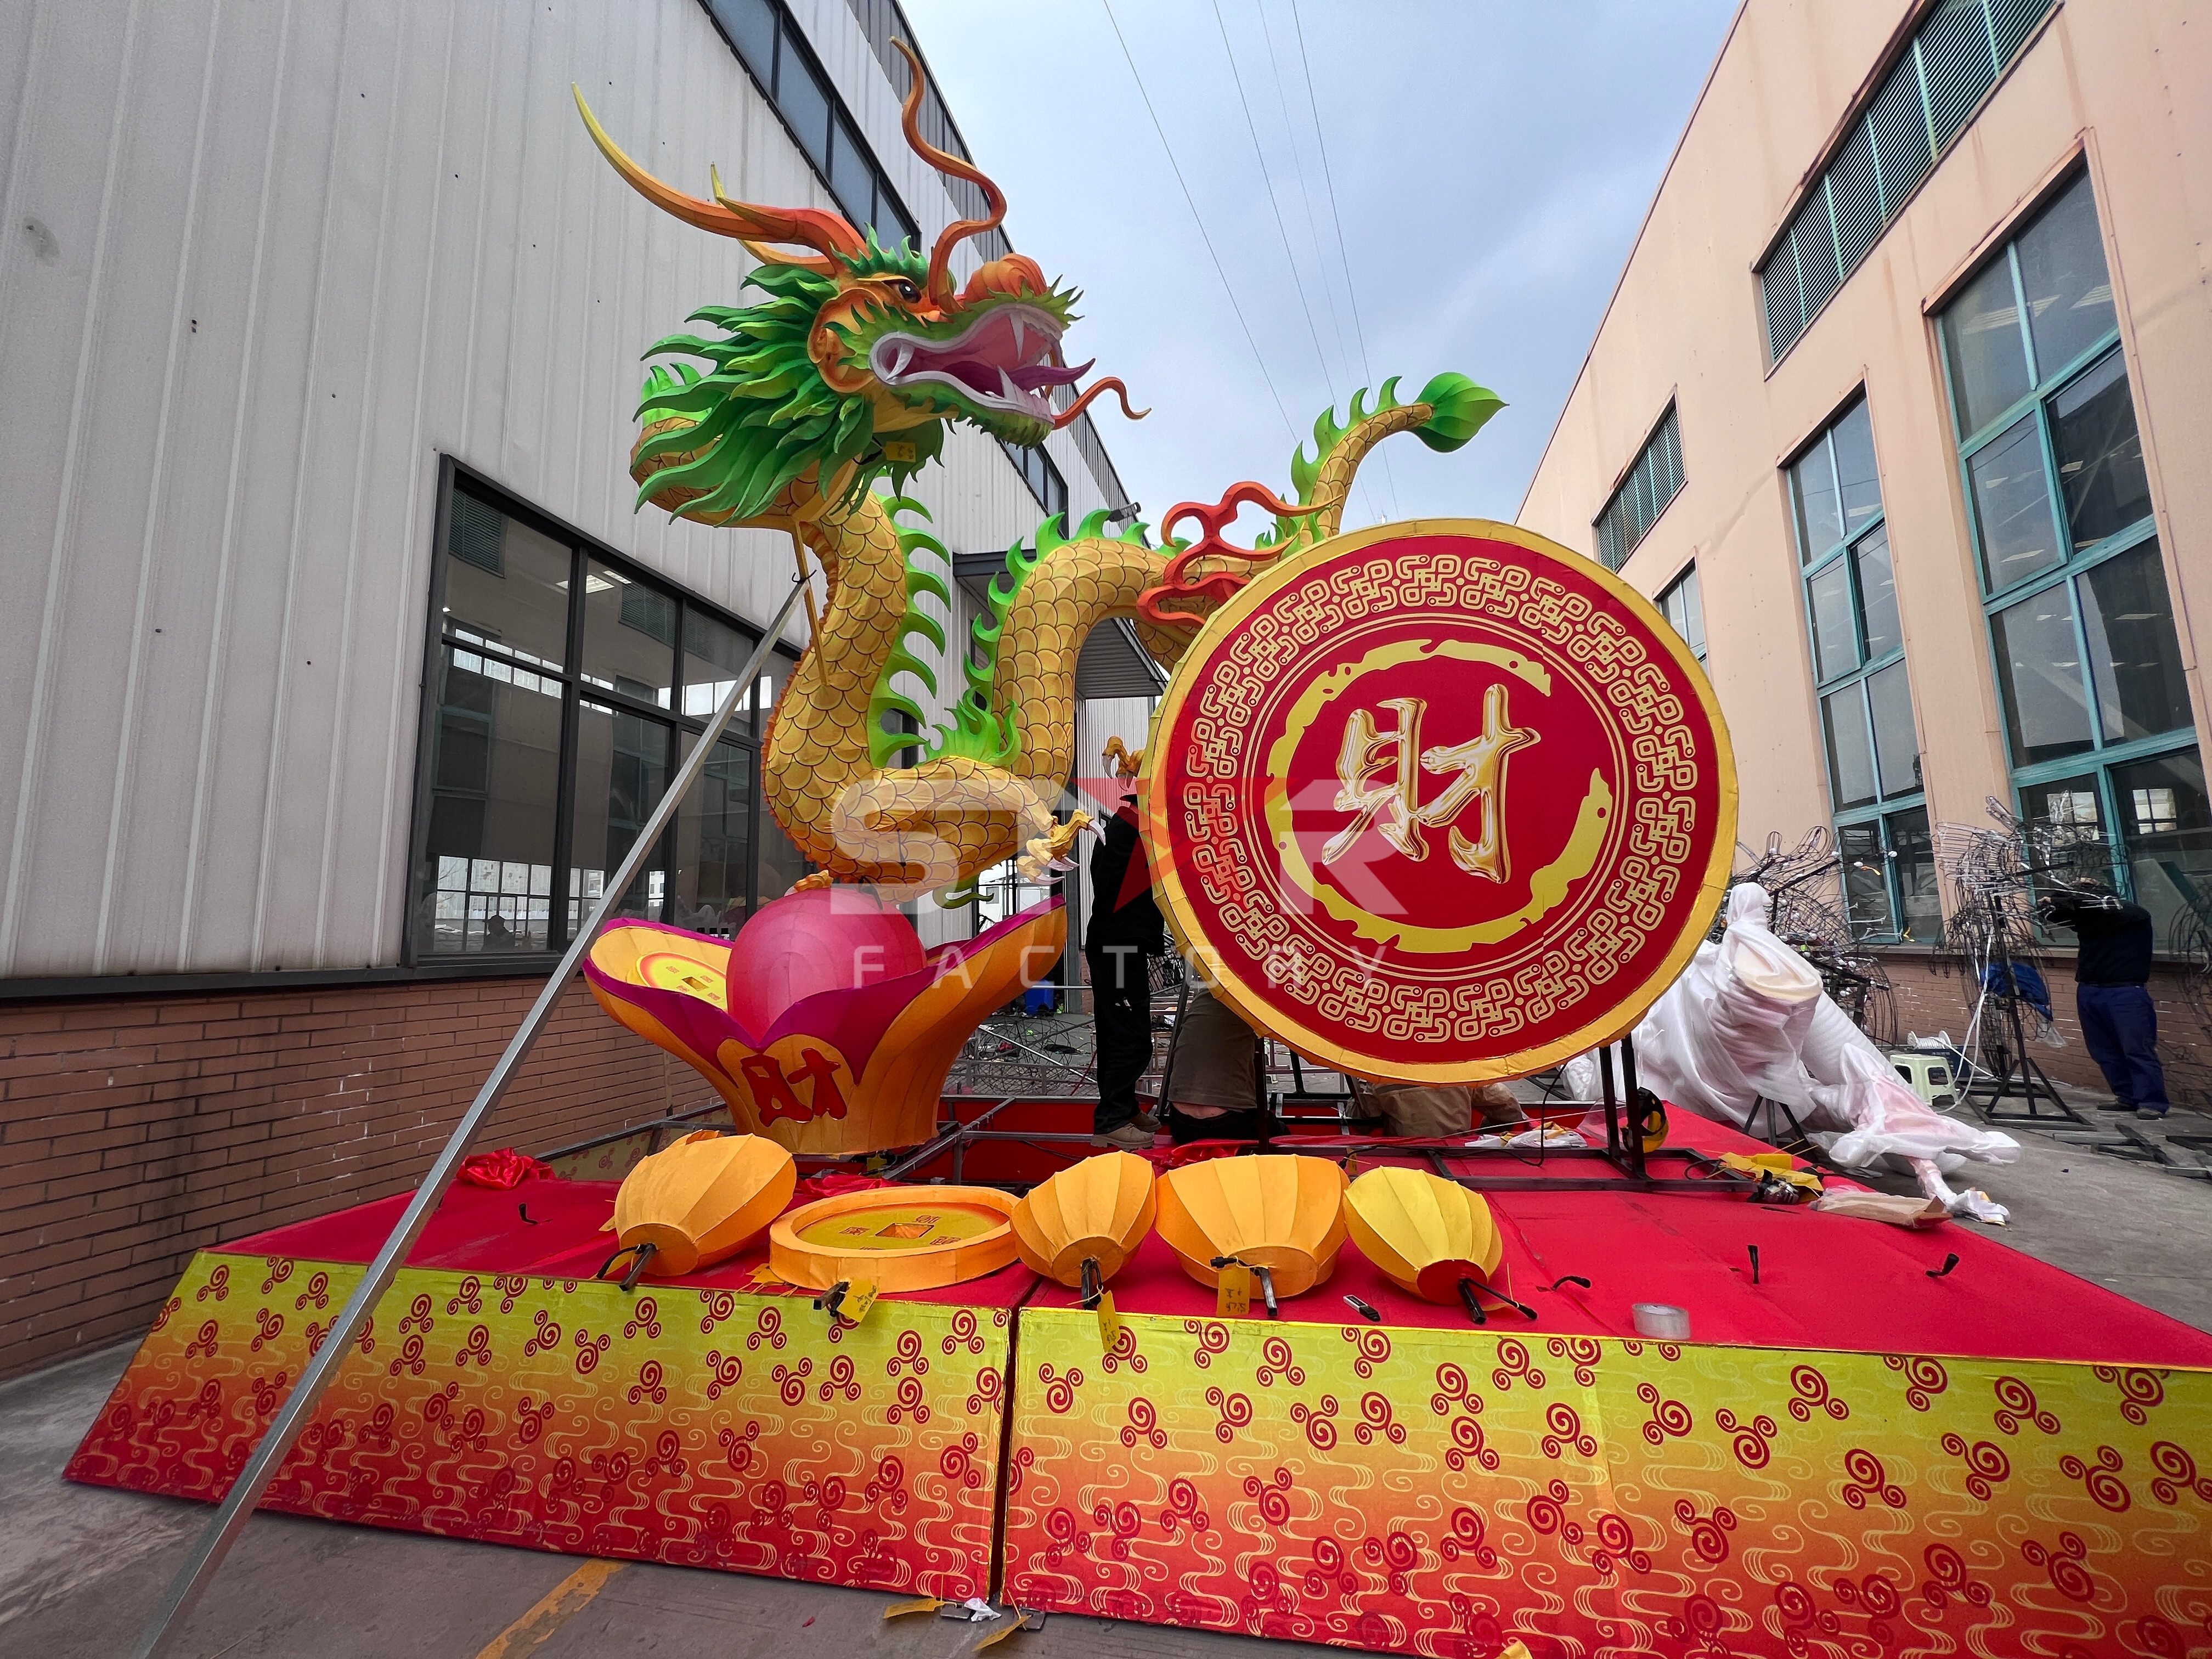 Star Factory Lantern Ltd. Illuminates the Dragon Year Spring Festival with Global Ambitions